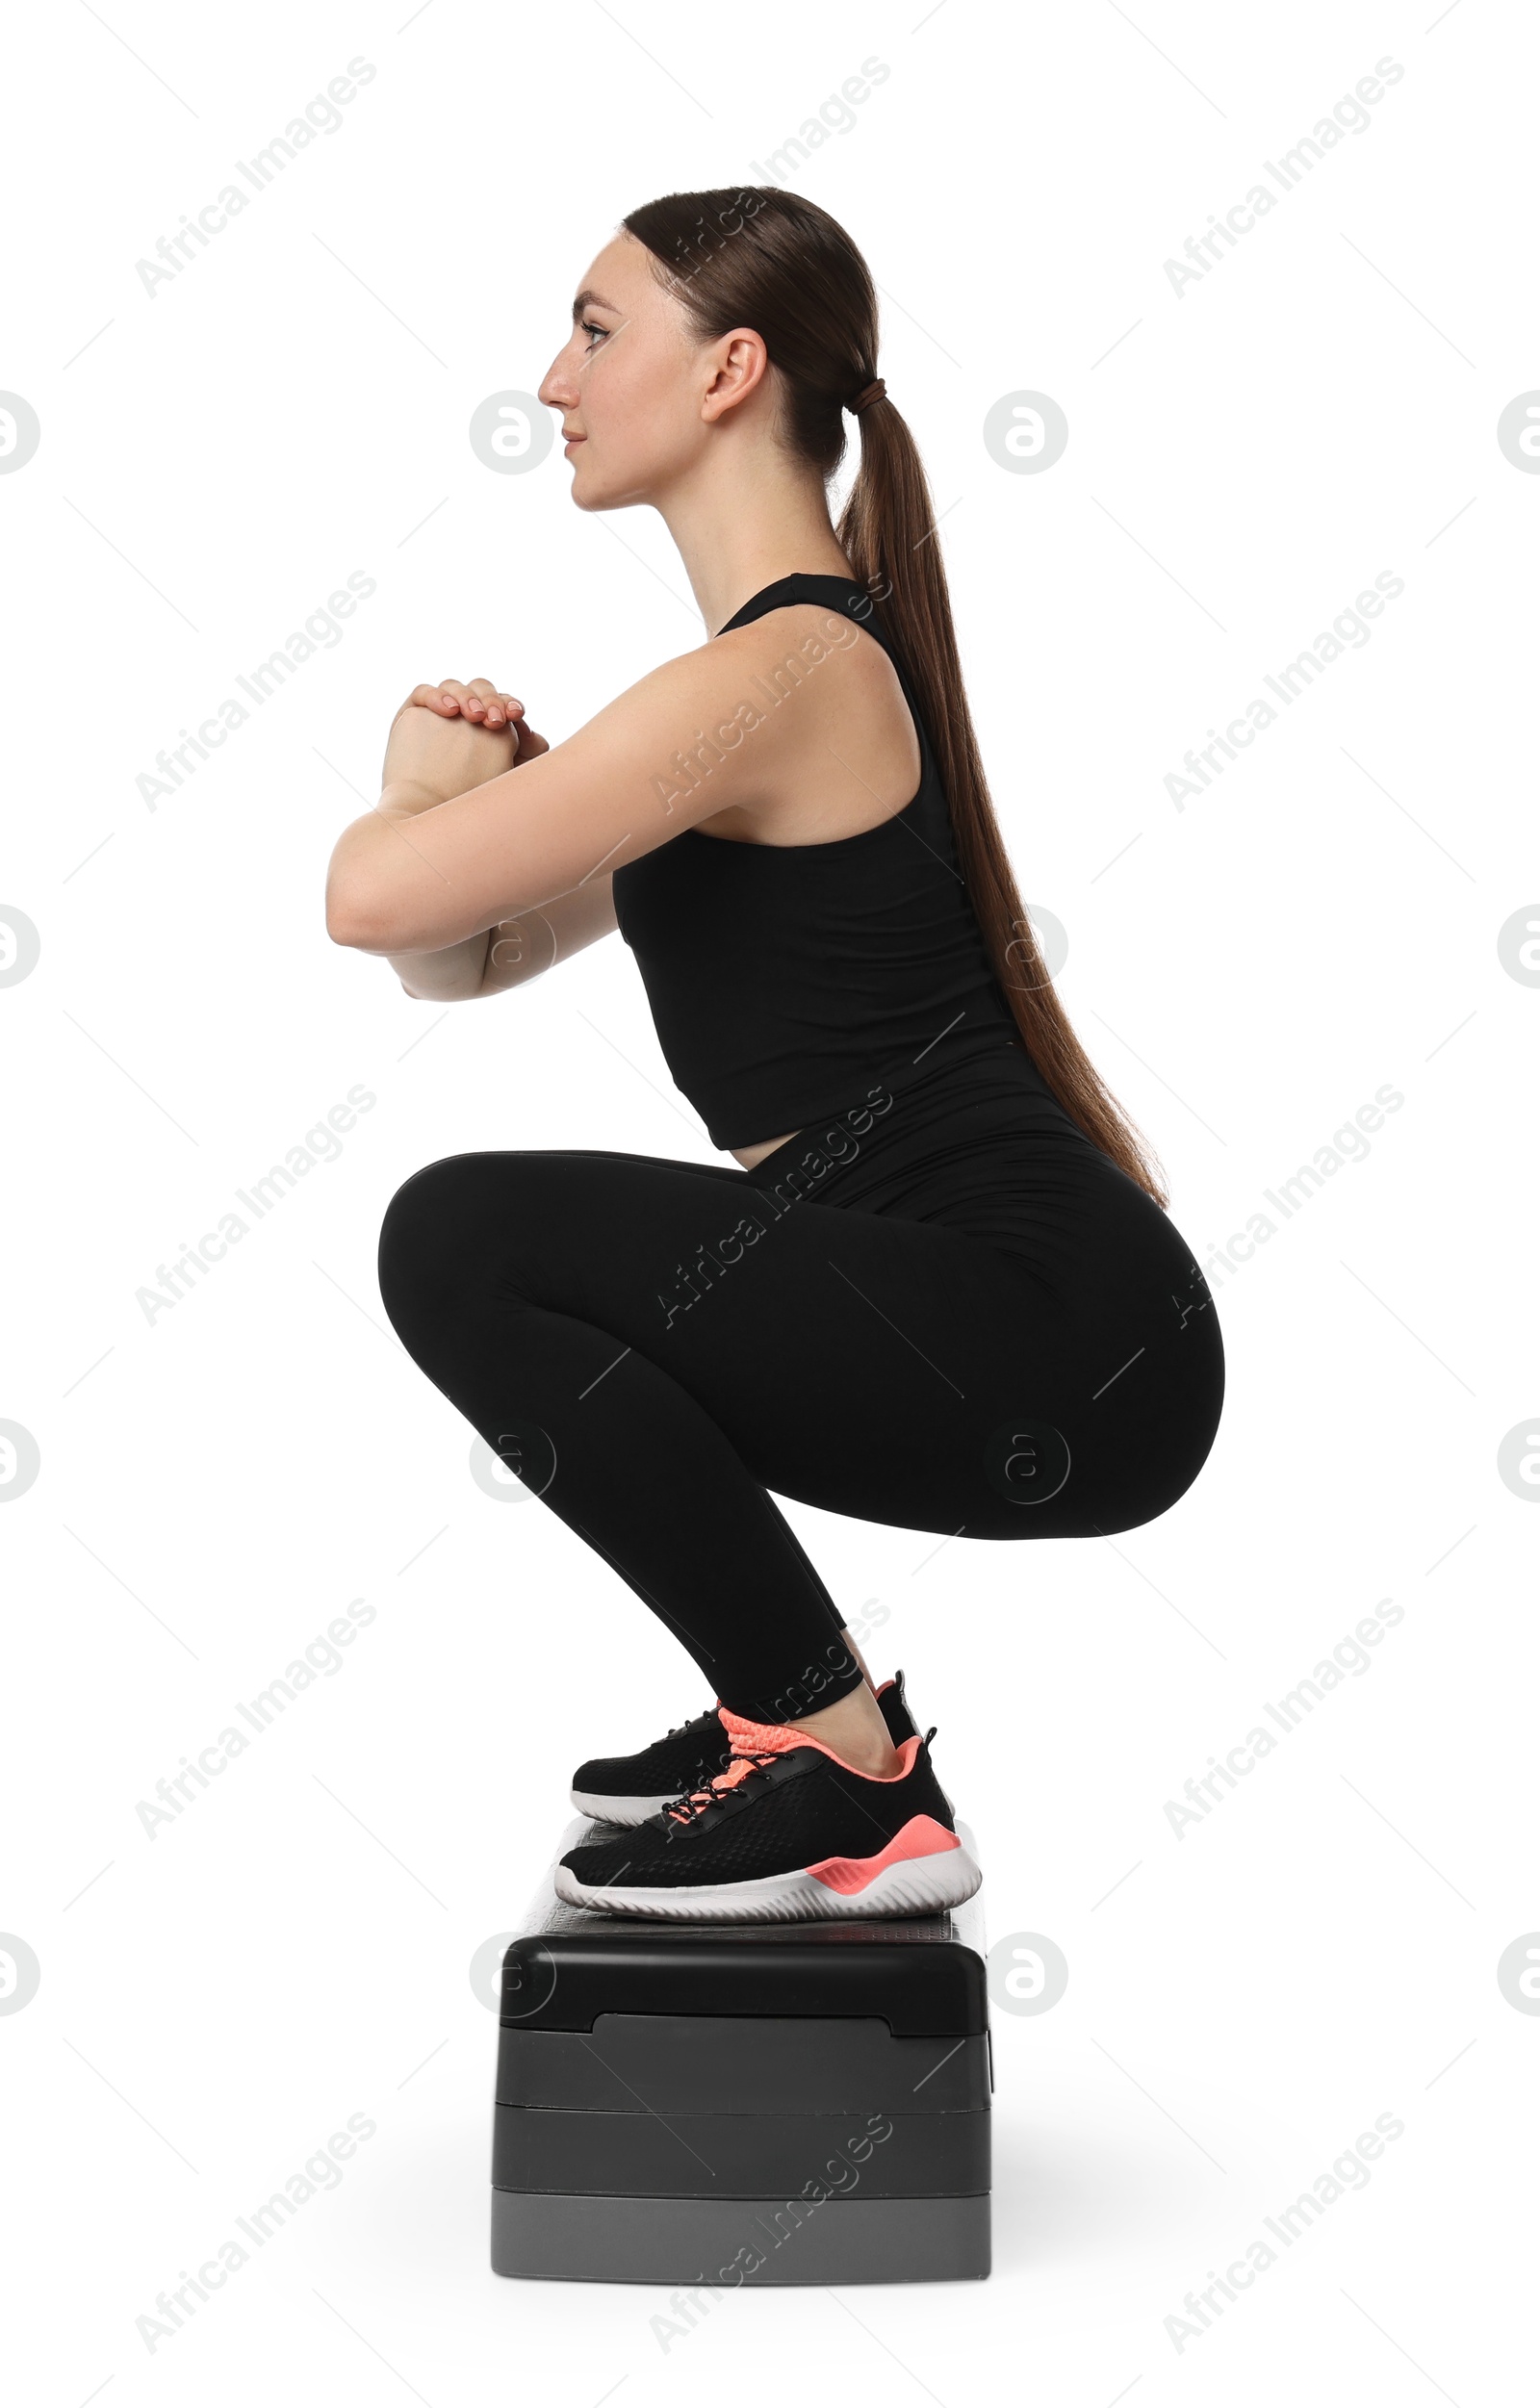 Photo of Young woman doing aerobic exercise with step platform on white background